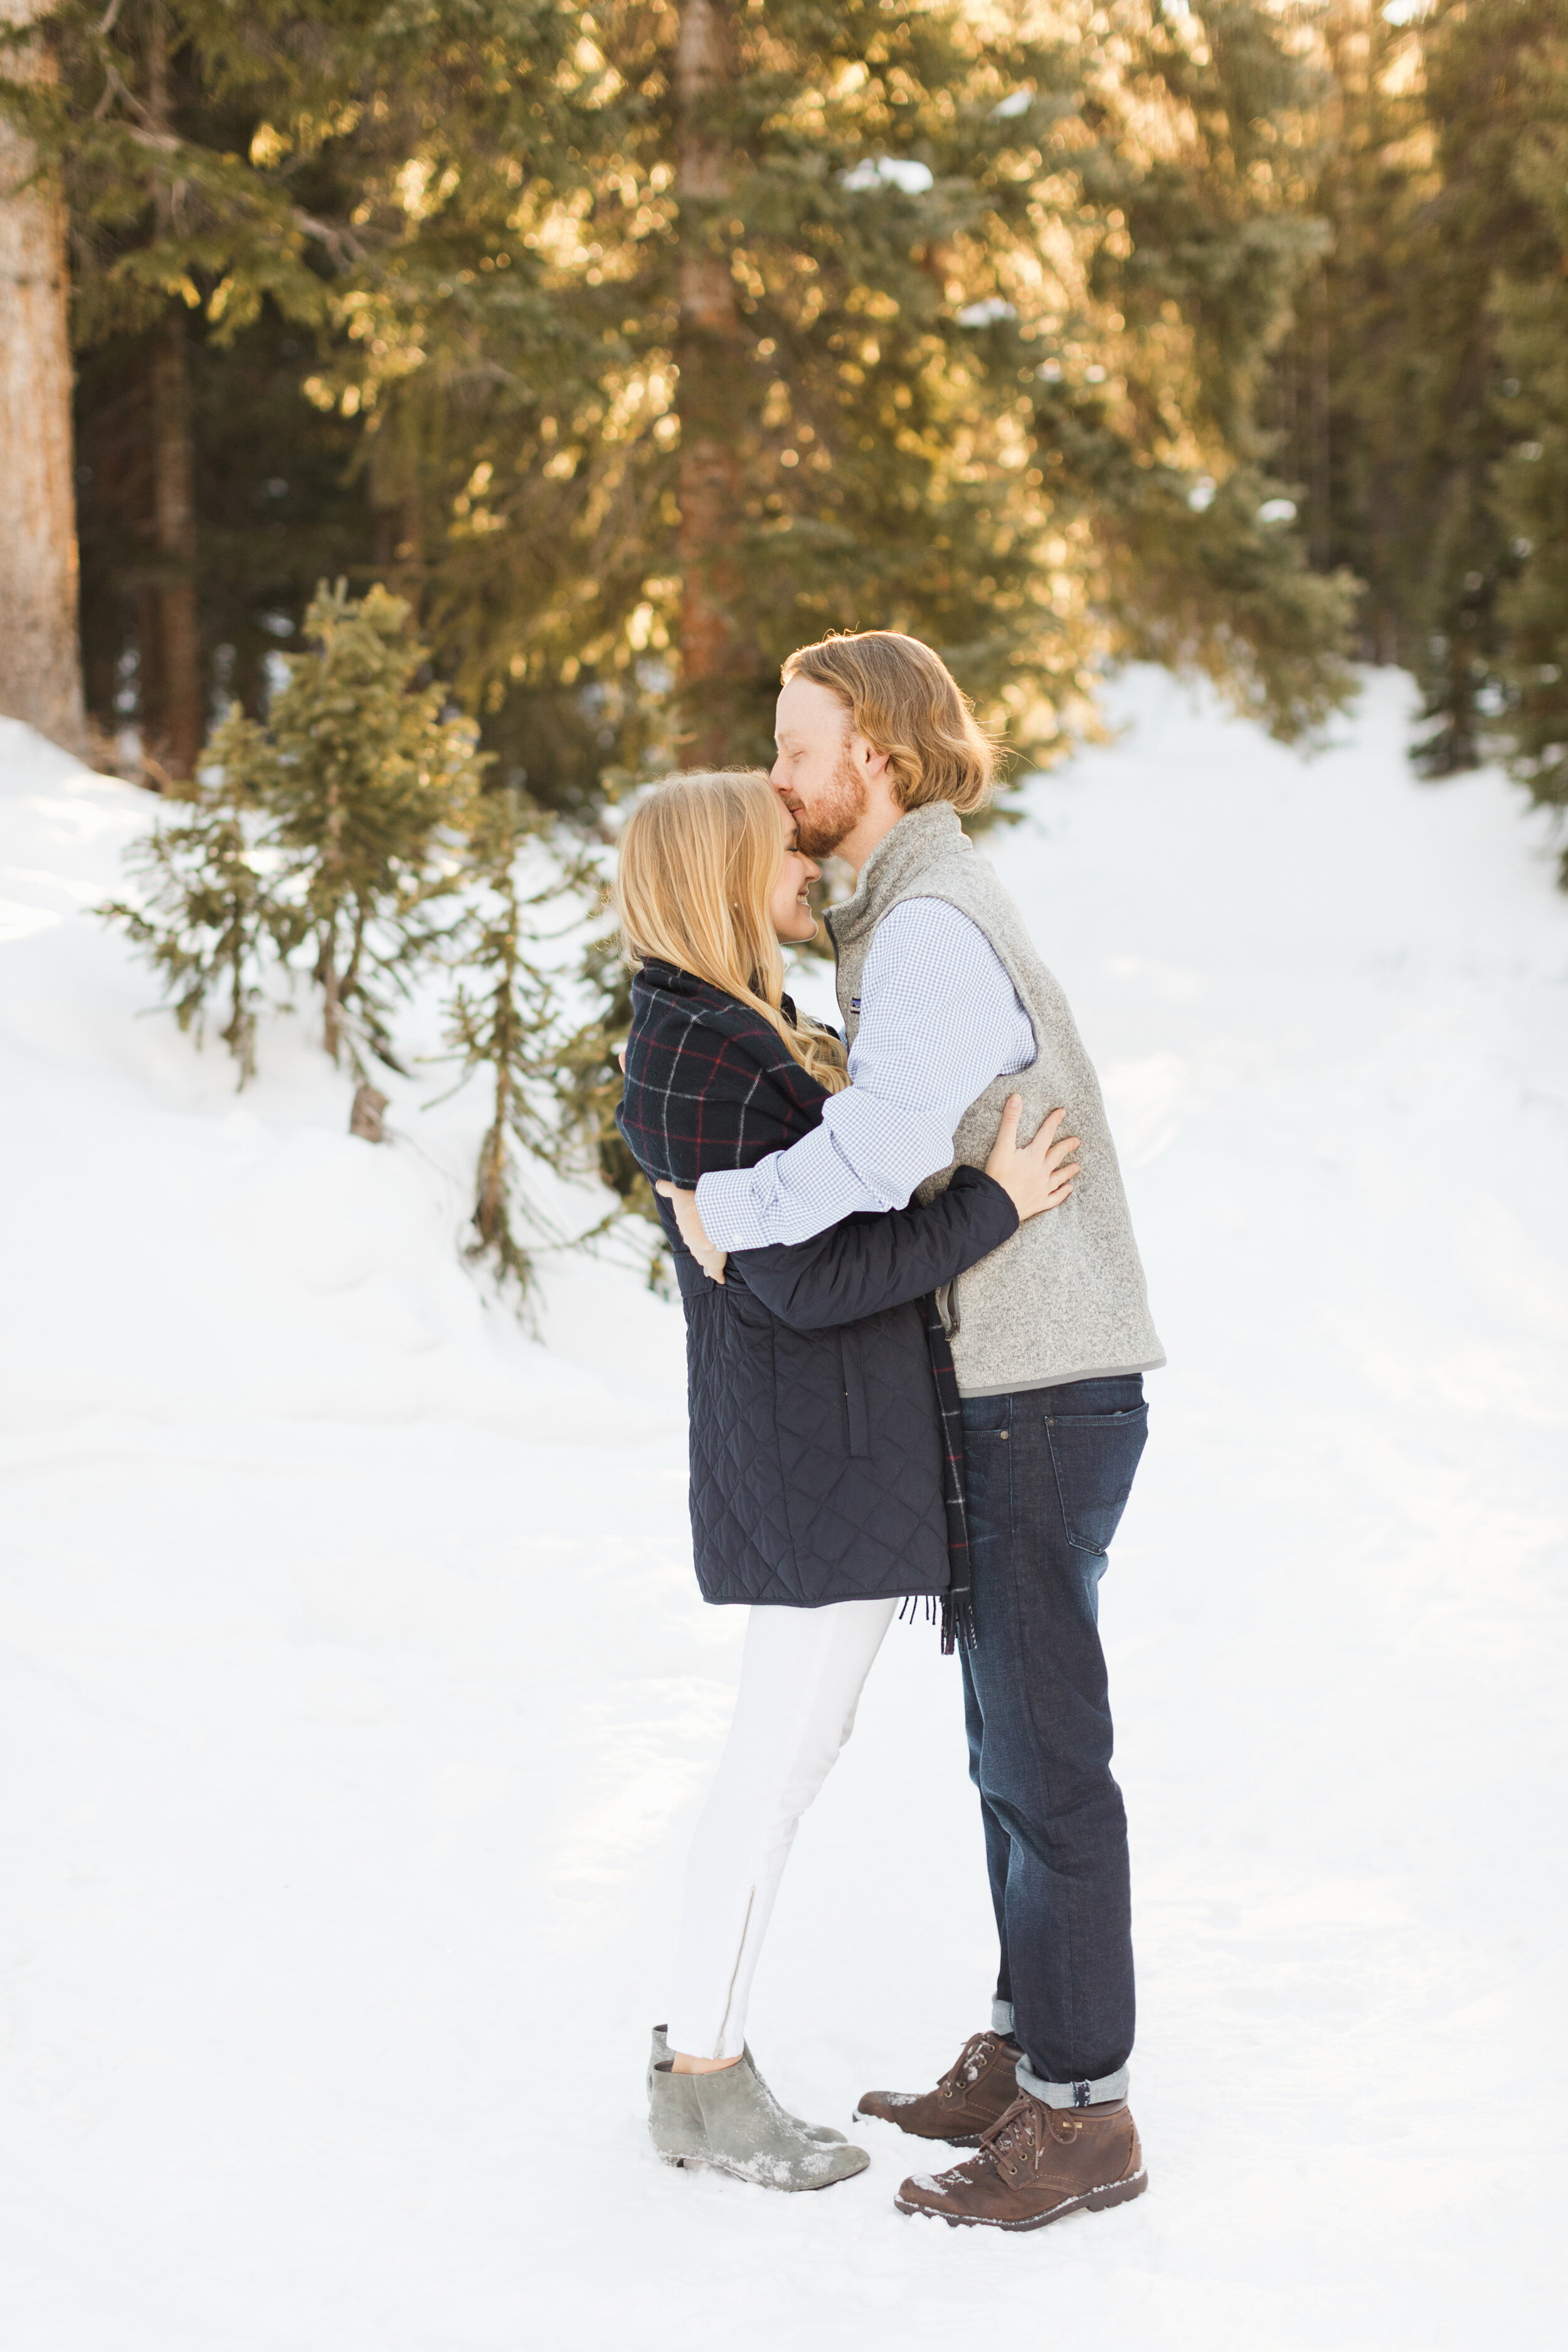 snowy-colorado-engagement-photos-in-the-forest-by-jackie-cooper-photo-05.jpg